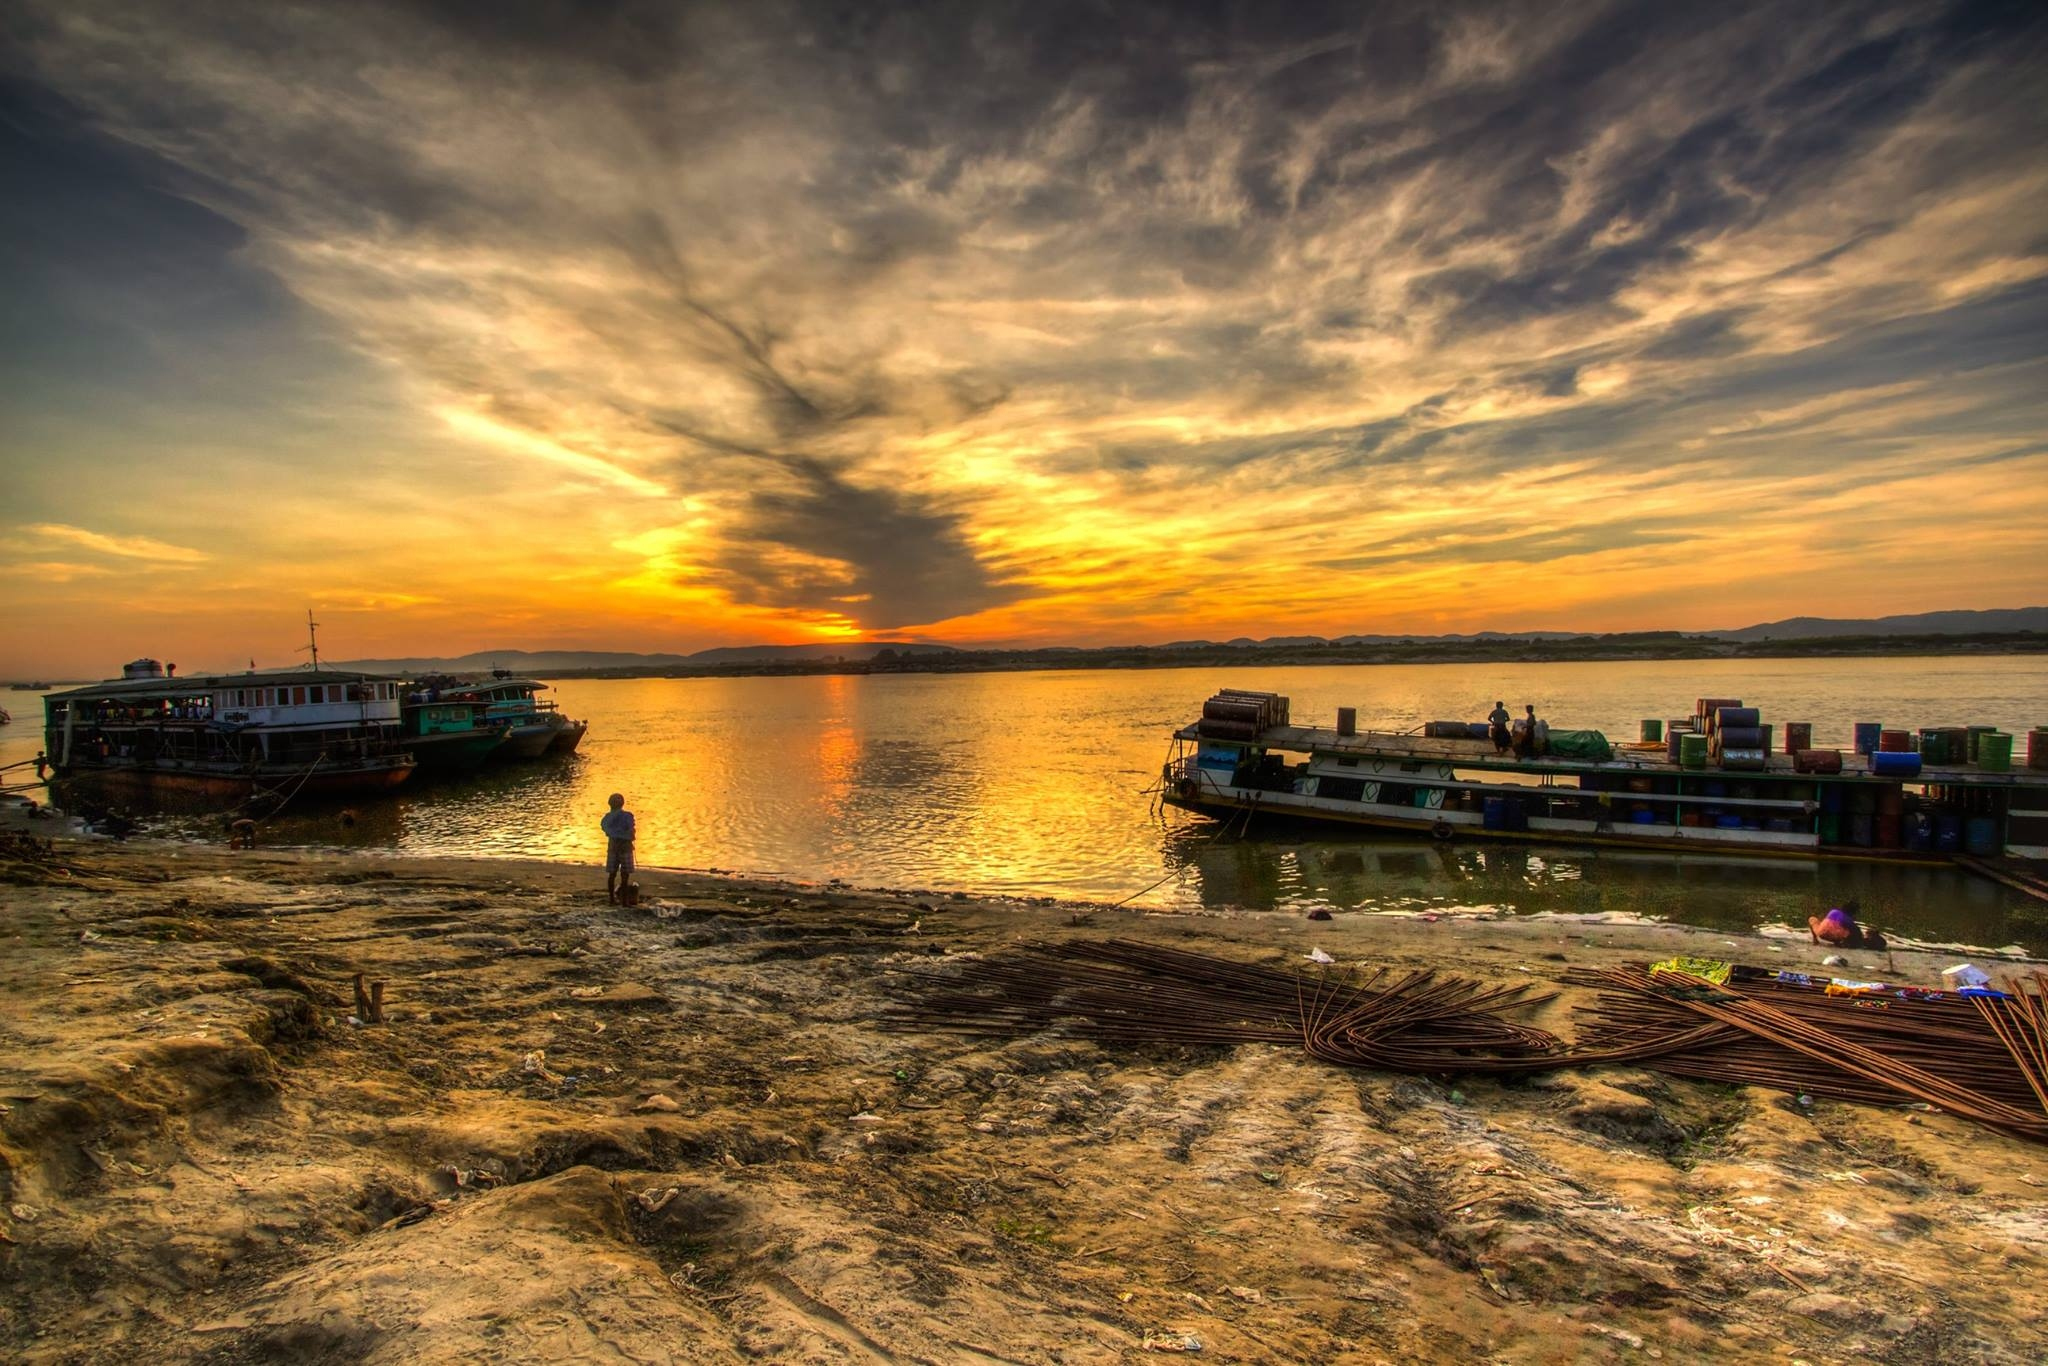 A man observes the stationed boats by the river with the sunset in the background